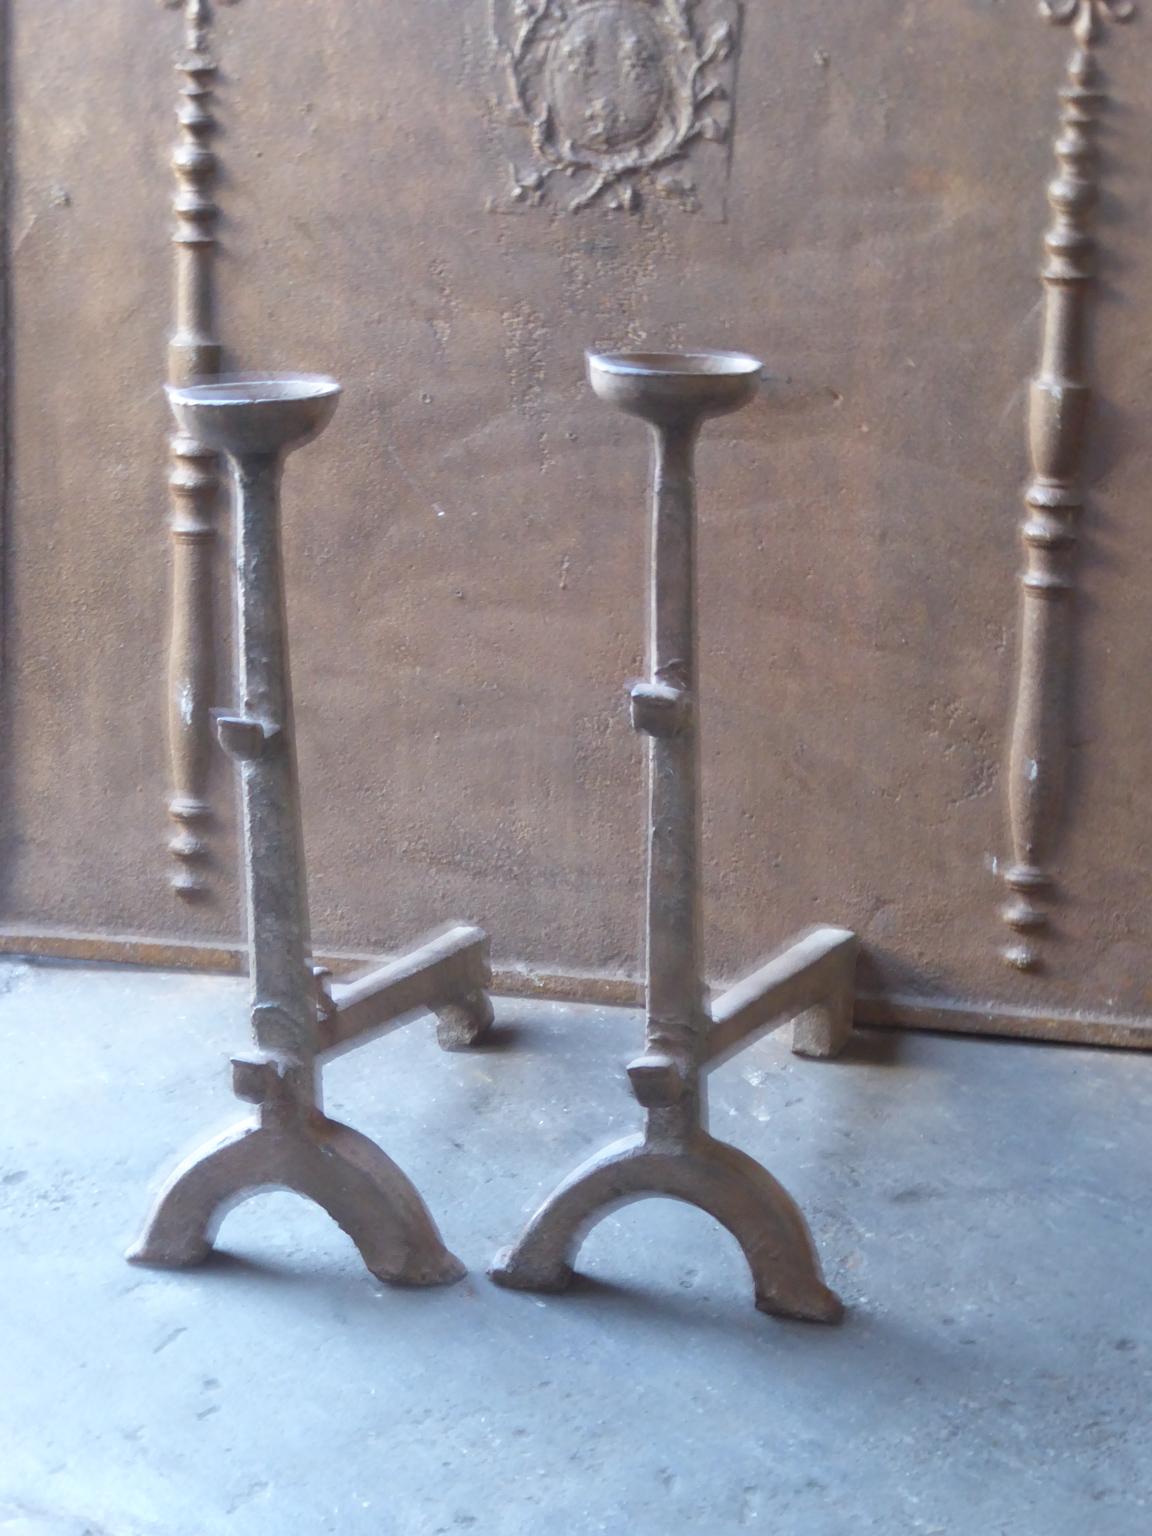 17th century French andirons made of cast iron. The style of the andirons is Gothic. The andirons have spit hooks to grill food and a cup to keep drinks warm. They are in a good condition.